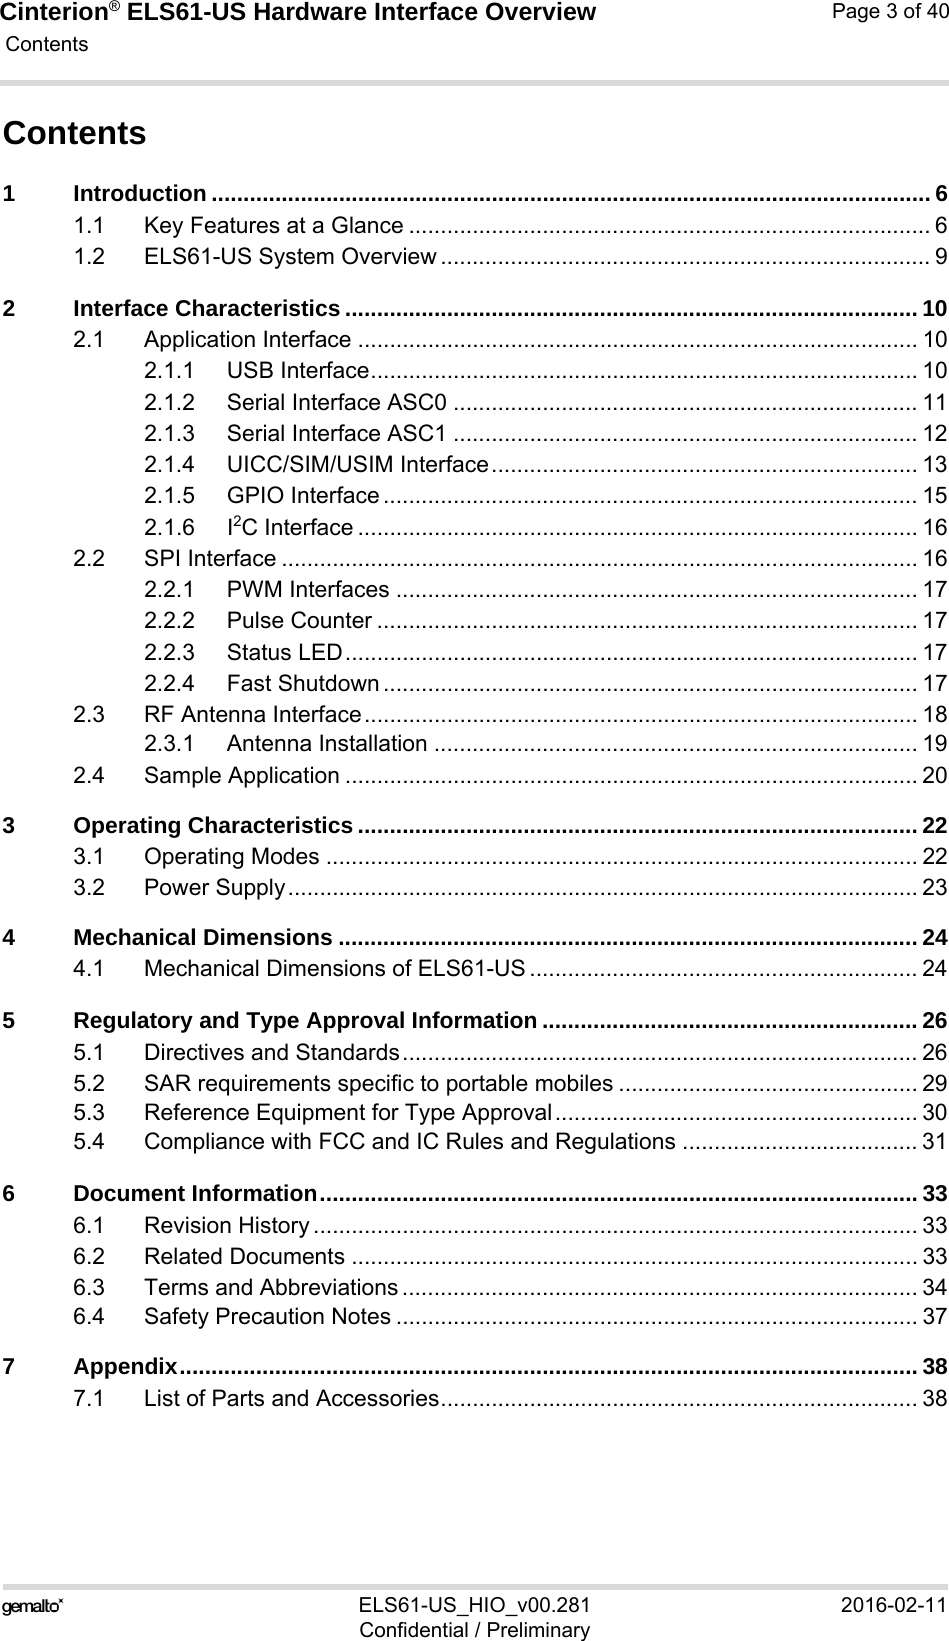 Cinterion® ELS61-US Hardware Interface Overview Contents40ELS61-US_HIO_v00.281 2016-02-11Confidential / PreliminaryPage 3 of 40Contents1 Introduction ................................................................................................................. 61.1 Key Features at a Glance .................................................................................. 61.2 ELS61-US System Overview ............................................................................. 92 Interface Characteristics .......................................................................................... 102.1 Application Interface ........................................................................................ 102.1.1 USB Interface...................................................................................... 102.1.2 Serial Interface ASC0 ......................................................................... 112.1.3 Serial Interface ASC1 ......................................................................... 122.1.4 UICC/SIM/USIM Interface................................................................... 132.1.5 GPIO Interface .................................................................................... 152.1.6 I2C Interface ........................................................................................ 162.2 SPI Interface .................................................................................................... 162.2.1 PWM Interfaces .................................................................................. 172.2.2 Pulse Counter ..................................................................................... 172.2.3 Status LED.......................................................................................... 172.2.4 Fast Shutdown .................................................................................... 172.3 RF Antenna Interface....................................................................................... 182.3.1 Antenna Installation ............................................................................ 192.4 Sample Application .......................................................................................... 203 Operating Characteristics ........................................................................................ 223.1 Operating Modes ............................................................................................. 223.2 Power Supply................................................................................................... 234 Mechanical Dimensions ........................................................................................... 244.1 Mechanical Dimensions of ELS61-US ............................................................. 245 Regulatory and Type Approval Information ........................................................... 265.1 Directives and Standards................................................................................. 265.2 SAR requirements specific to portable mobiles ............................................... 295.3 Reference Equipment for Type Approval......................................................... 305.4 Compliance with FCC and IC Rules and Regulations ..................................... 316 Document Information.............................................................................................. 336.1 Revision History ............................................................................................... 336.2 Related Documents ......................................................................................... 336.3 Terms and Abbreviations ................................................................................. 346.4 Safety Precaution Notes .................................................................................. 377 Appendix.................................................................................................................... 387.1 List of Parts and Accessories........................................................................... 38